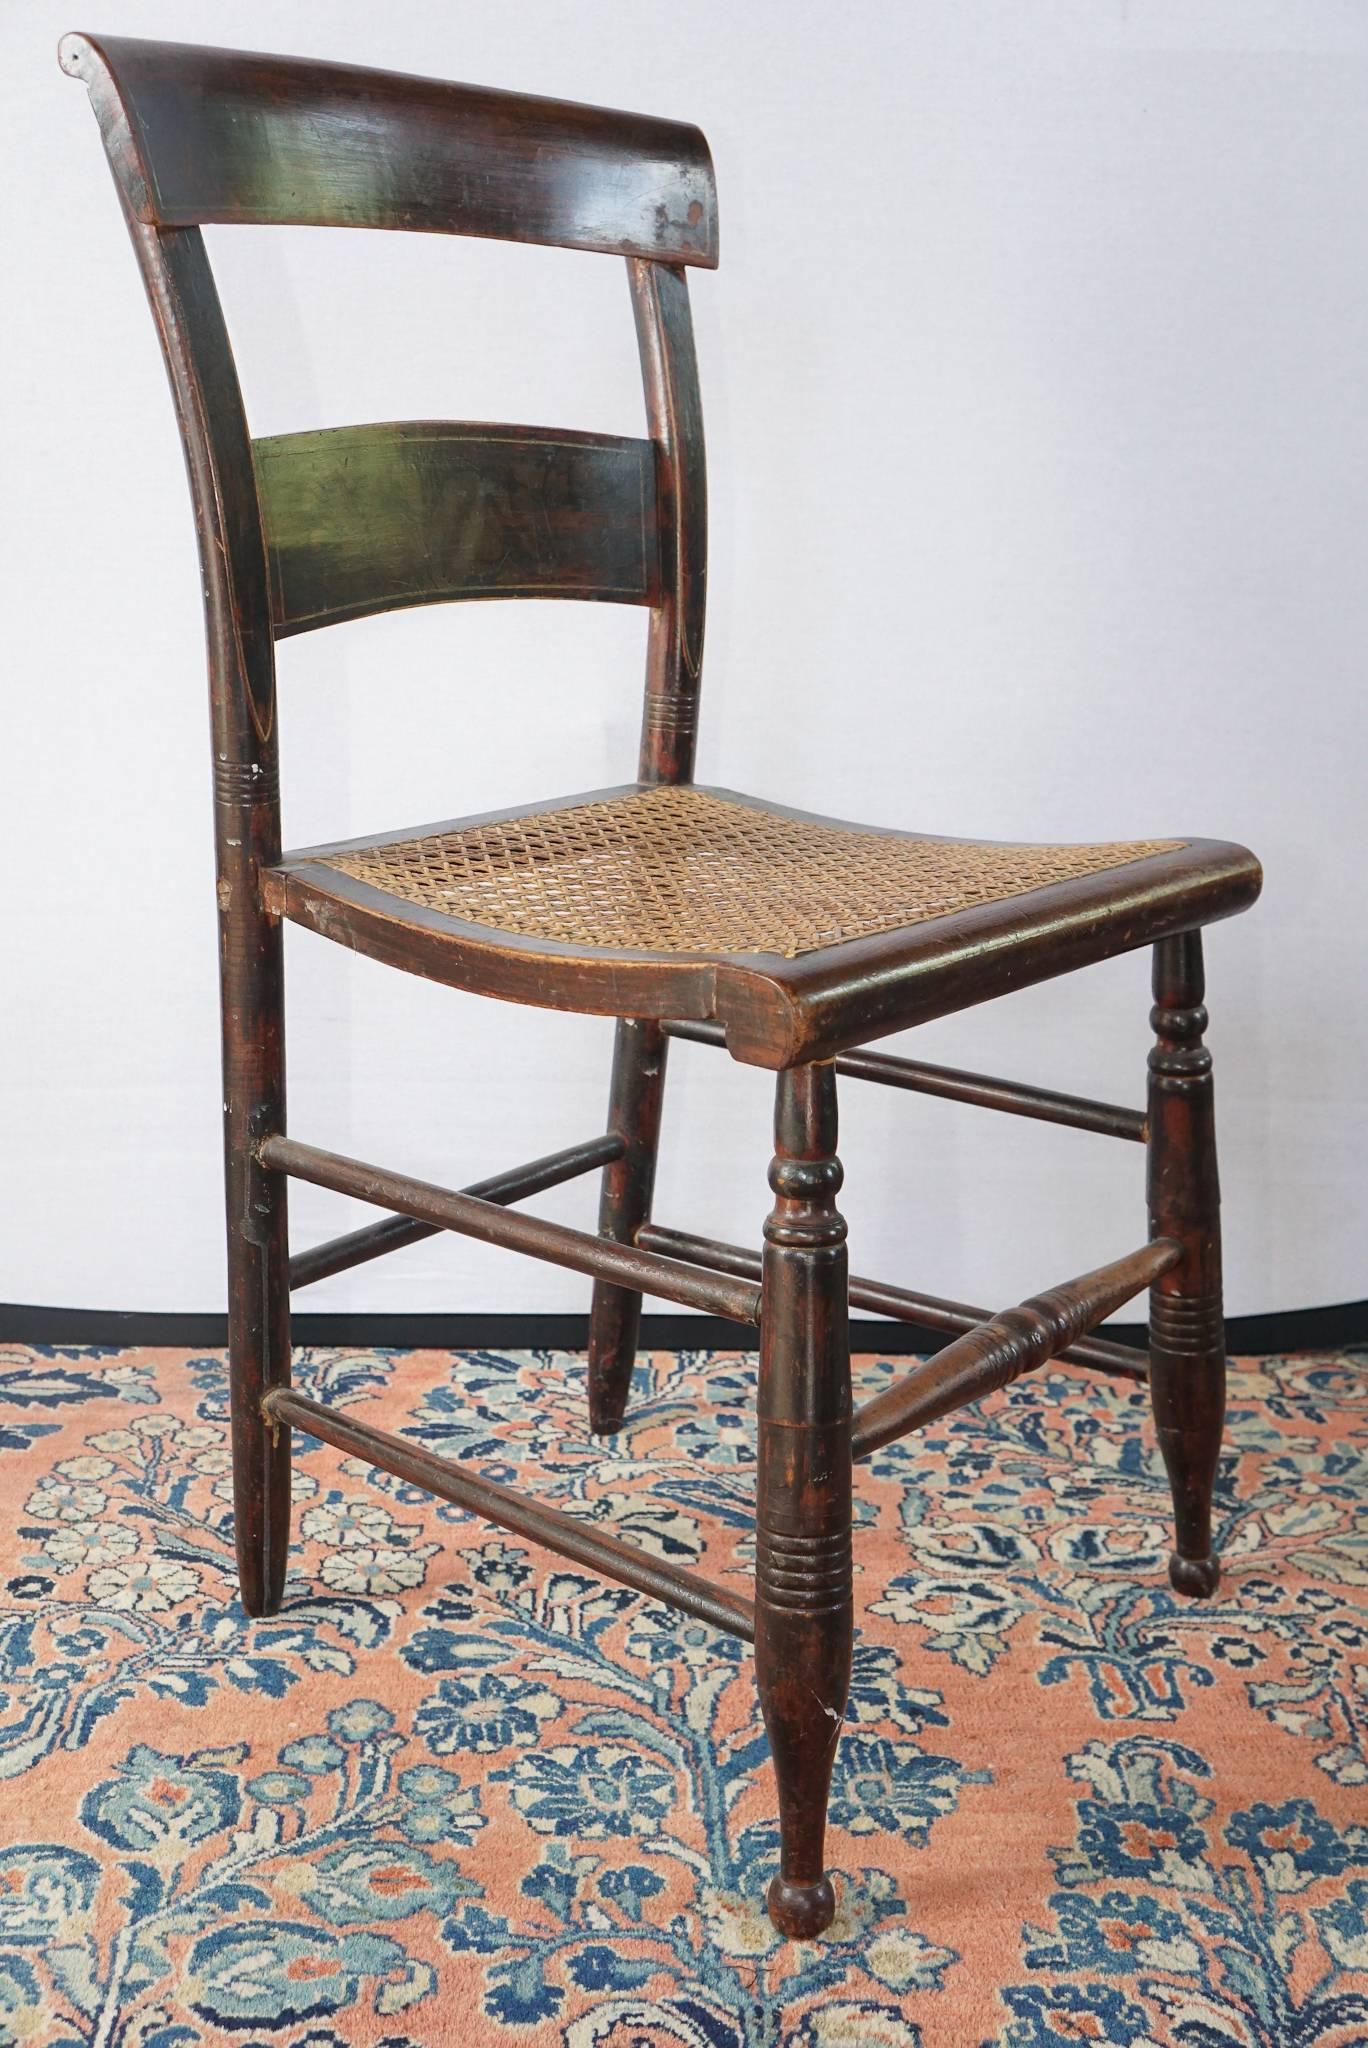 Nice set of American ebonized and decorated side chairs. Original decoration. Caned seats, circa 1825.